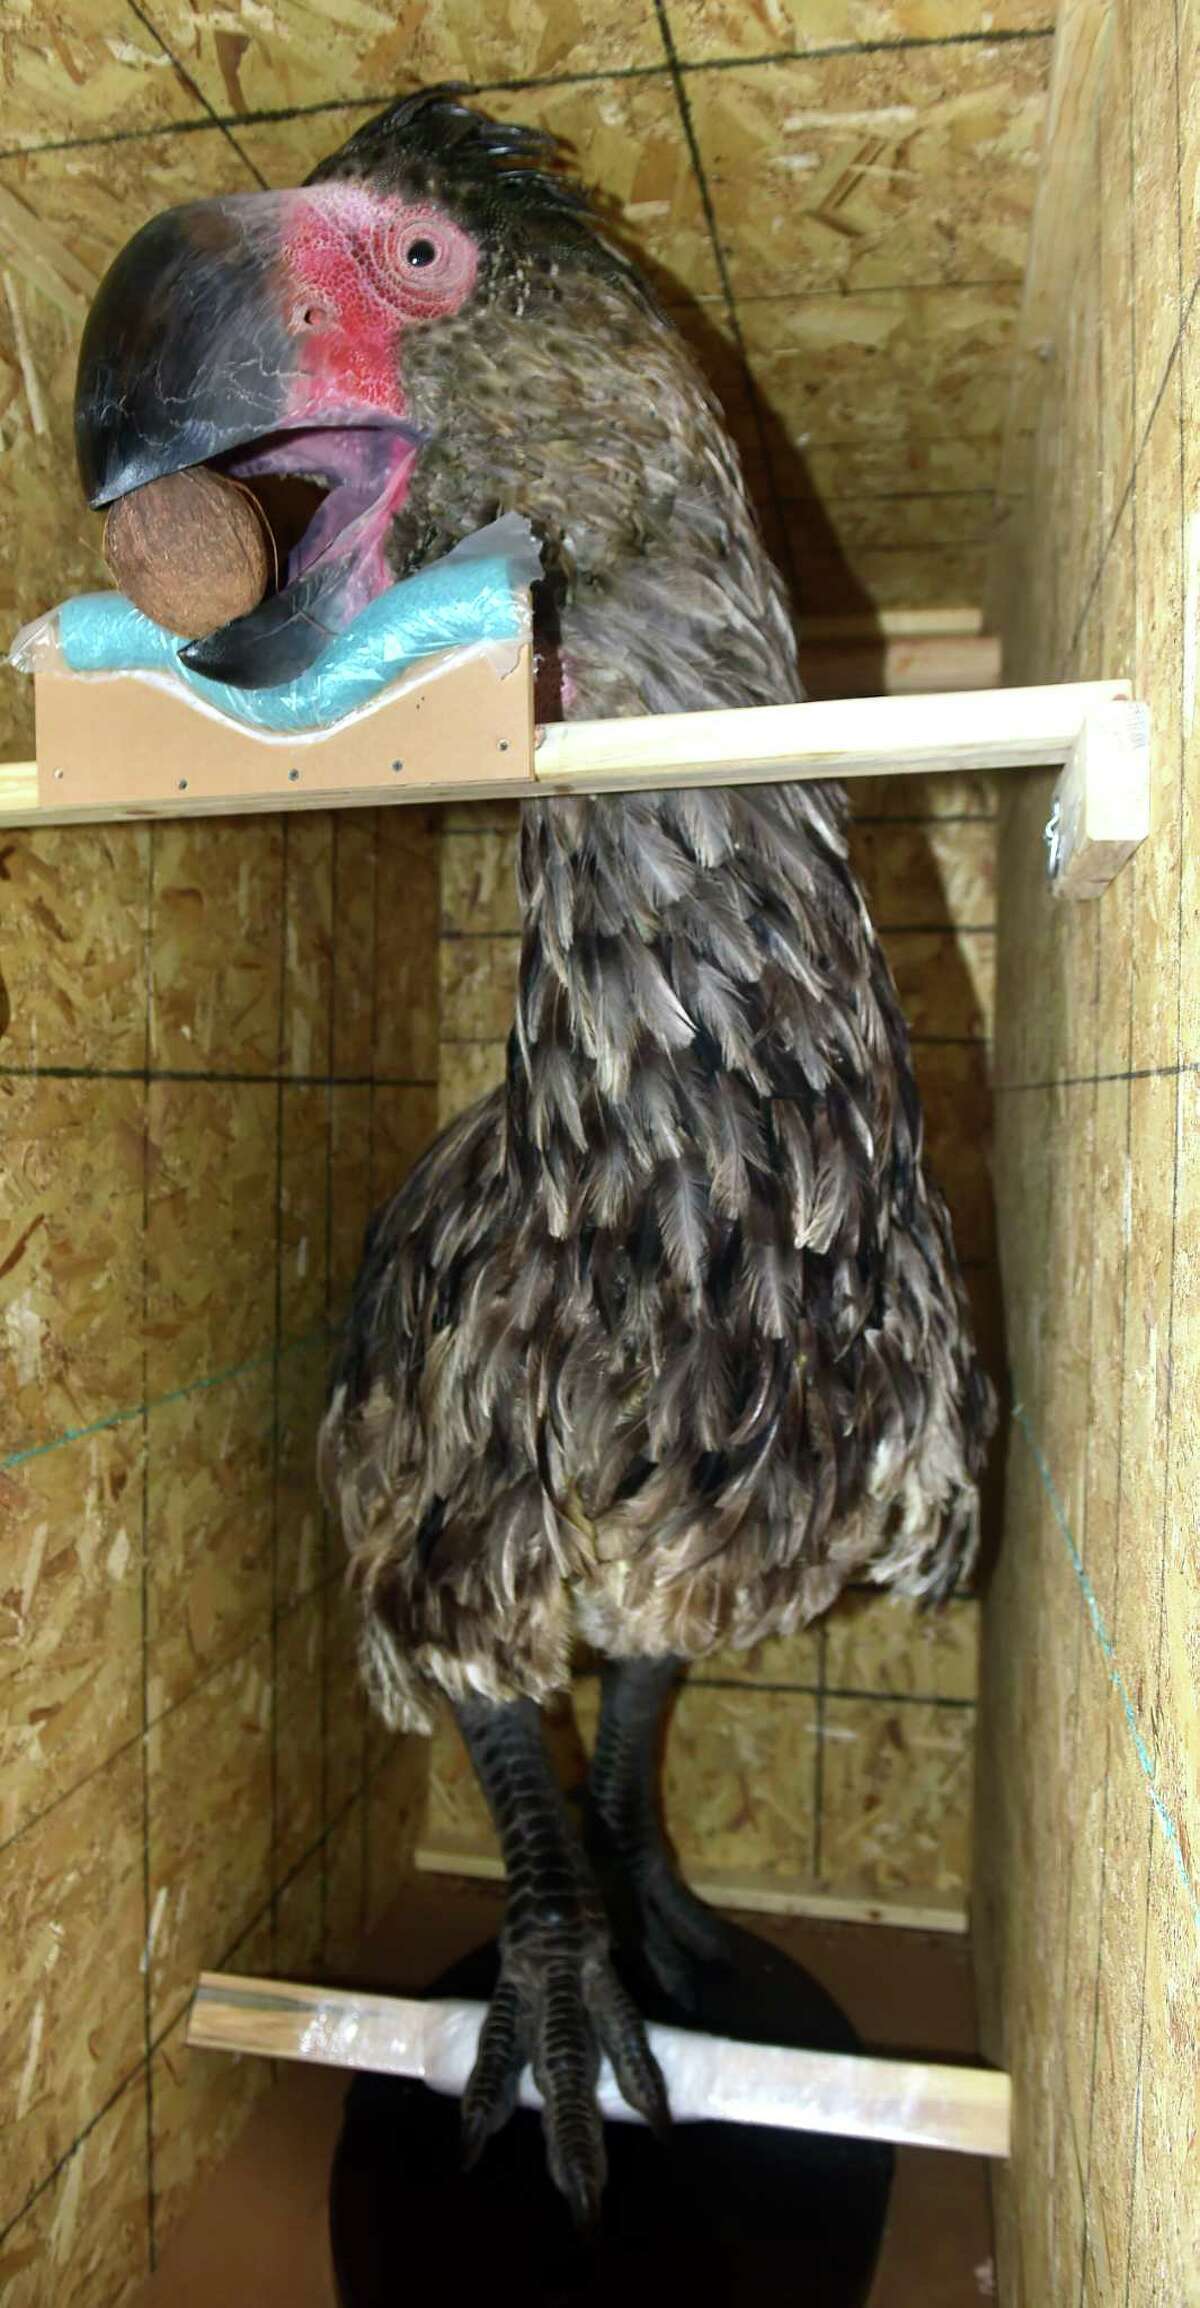 A life-size reconstruction of the giant flightless bird, Gastornis, photographed at the Yale Peabody Museum in New Haven on July 20, 2023 with a coconut in it's beak before being taken out of a crate.